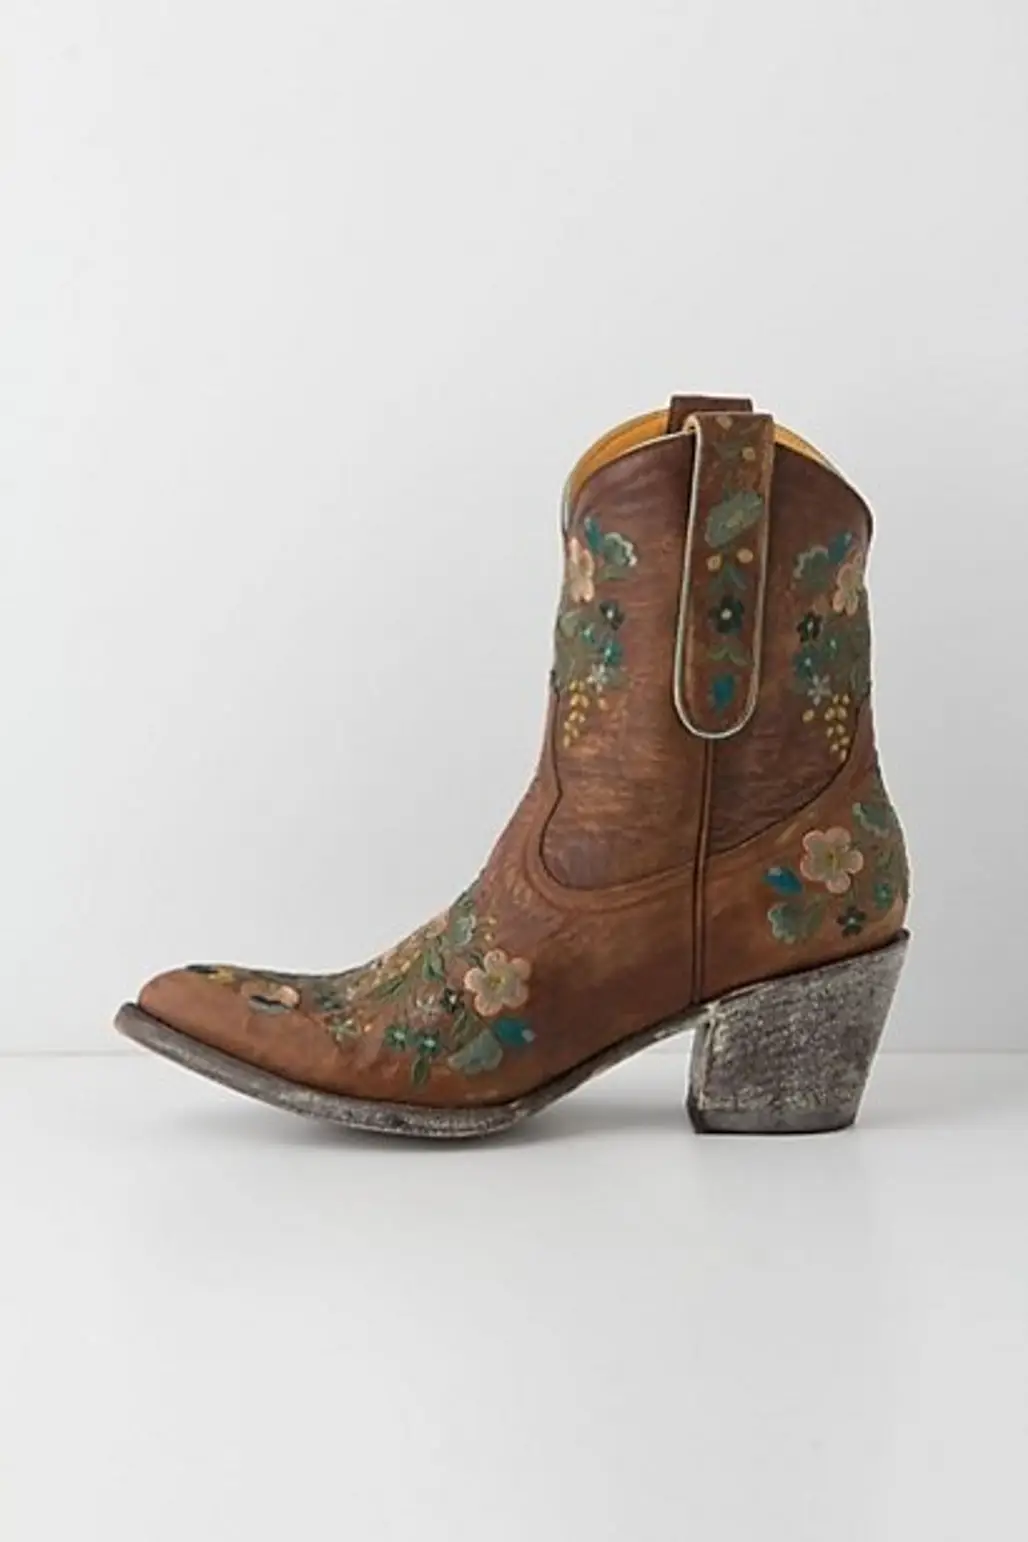 footwear,boot,brown,leather,cowboy boot,